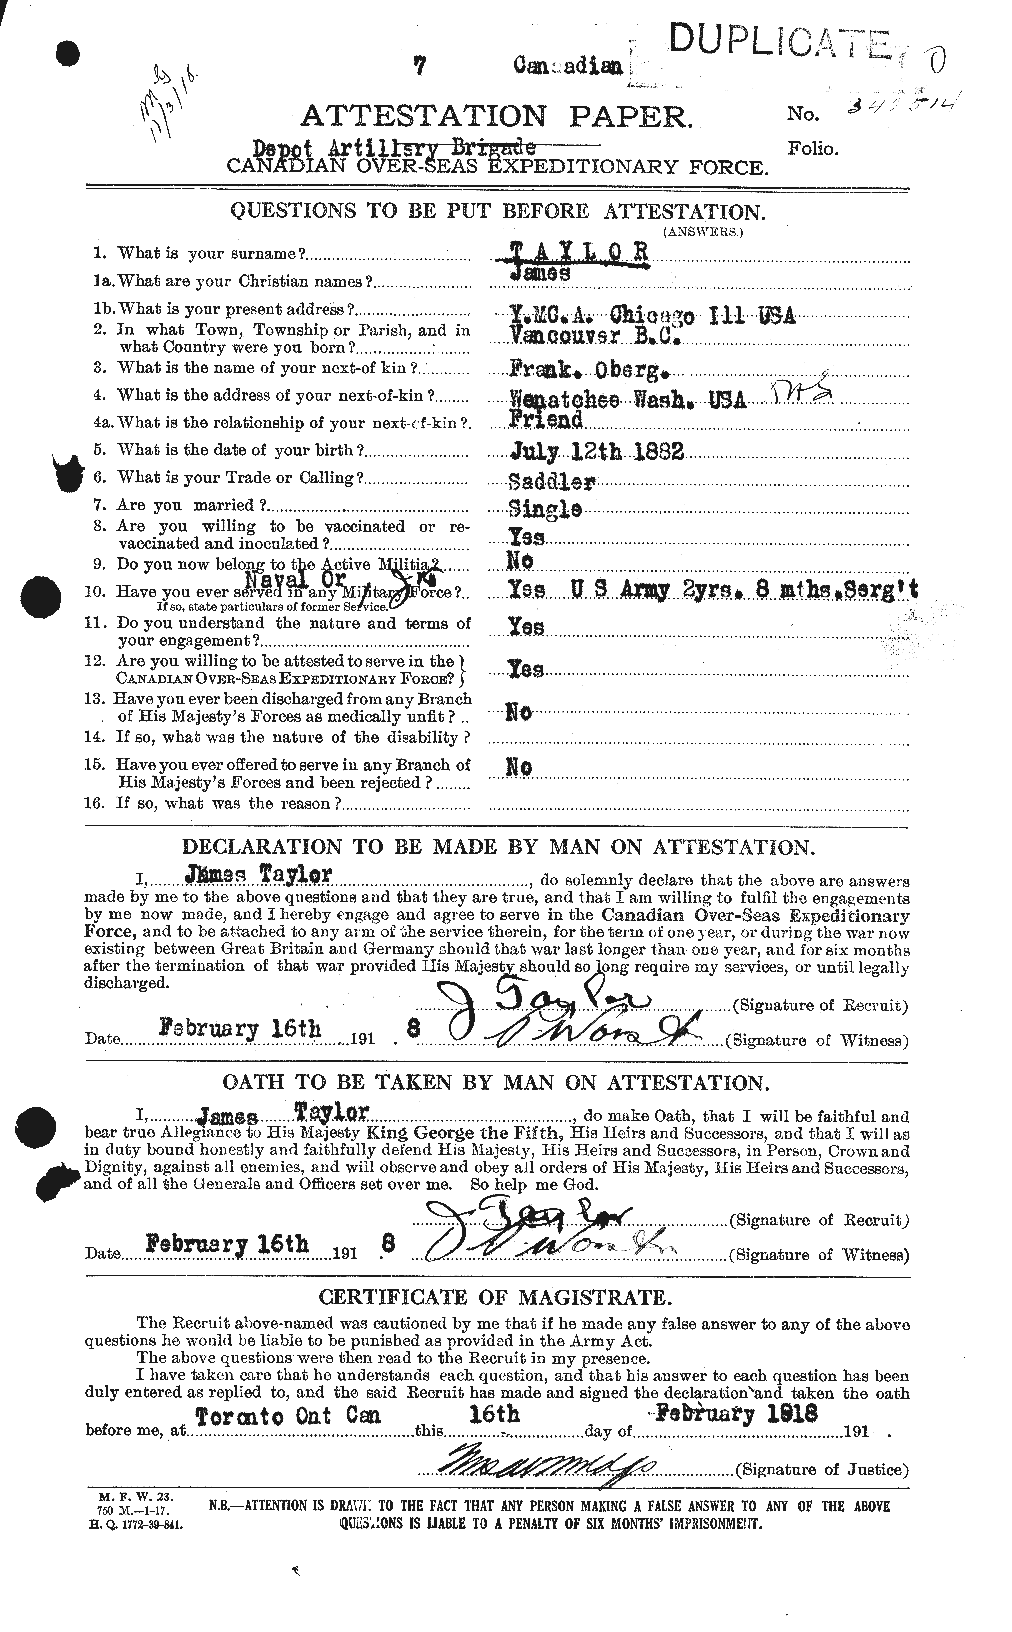 Personnel Records of the First World War - CEF 626671a